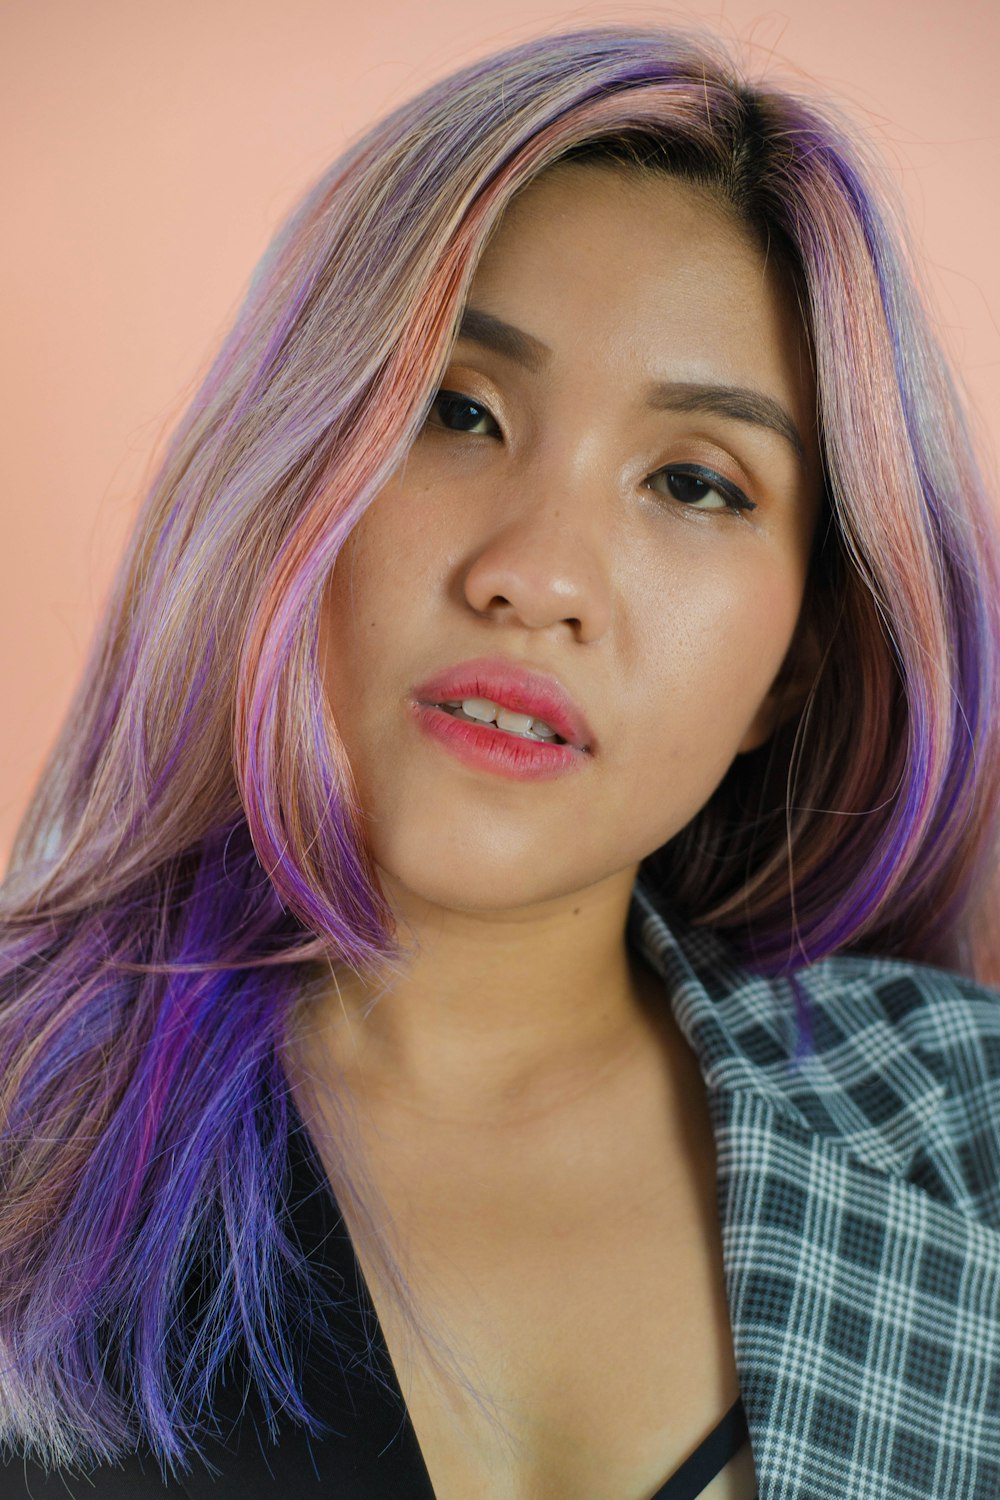 a woman with pink and purple hair posing for a picture